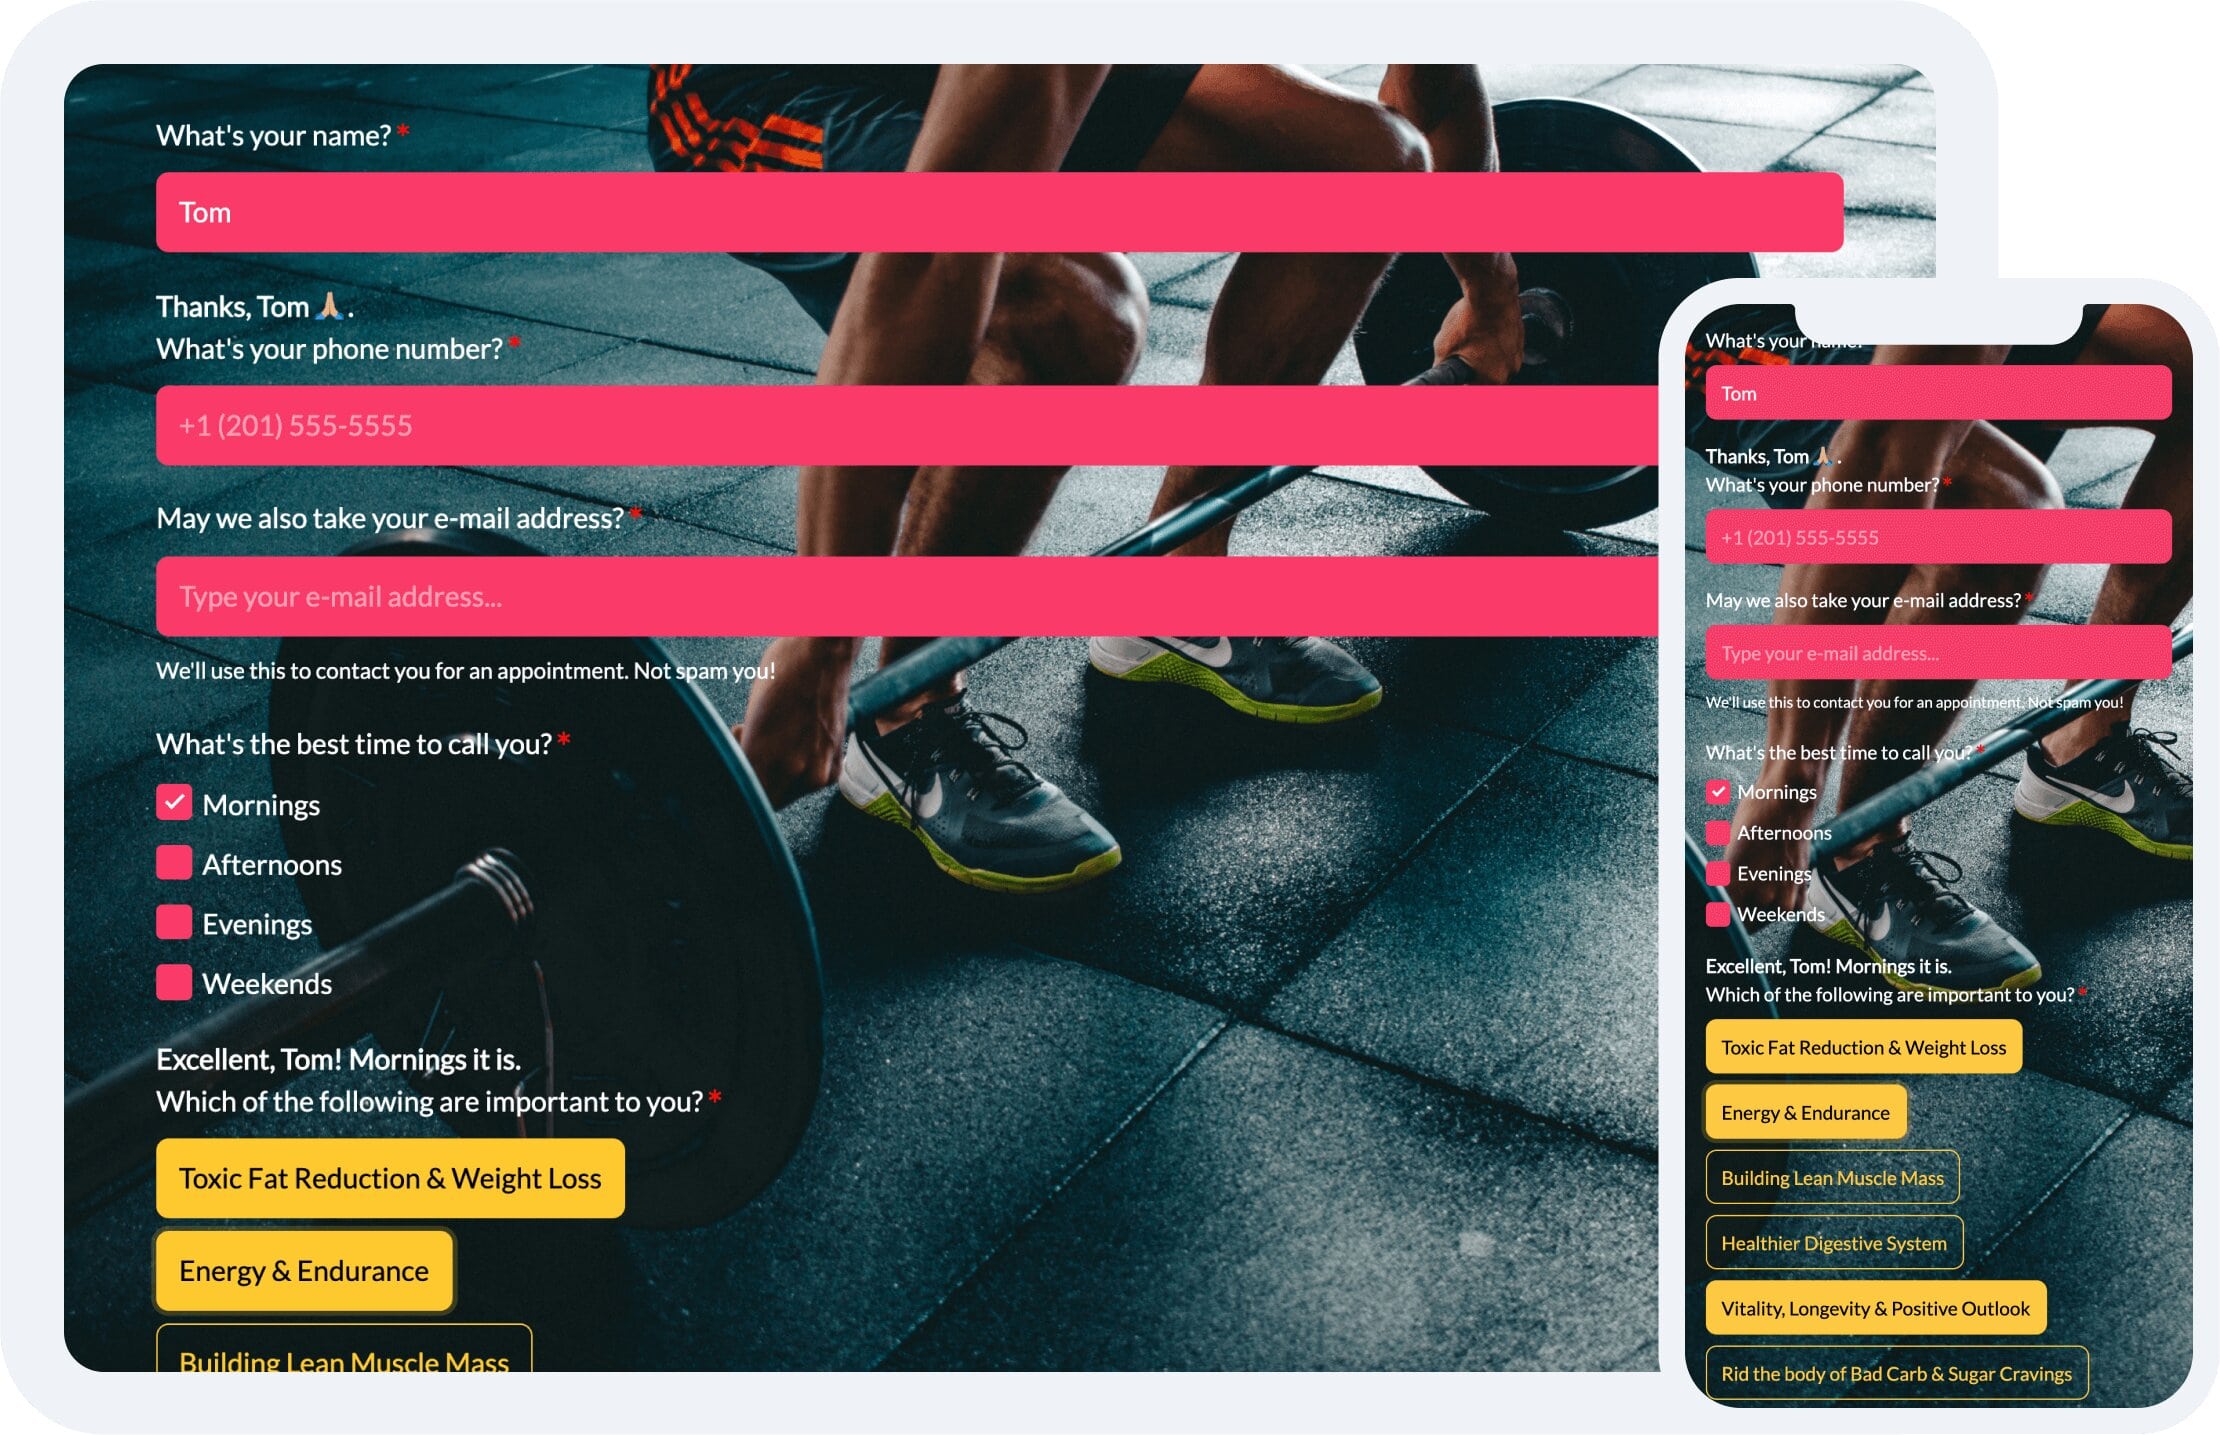 Screenshots of a fitness registration form in the classic form face, shown on a tablet and a mobile phone.